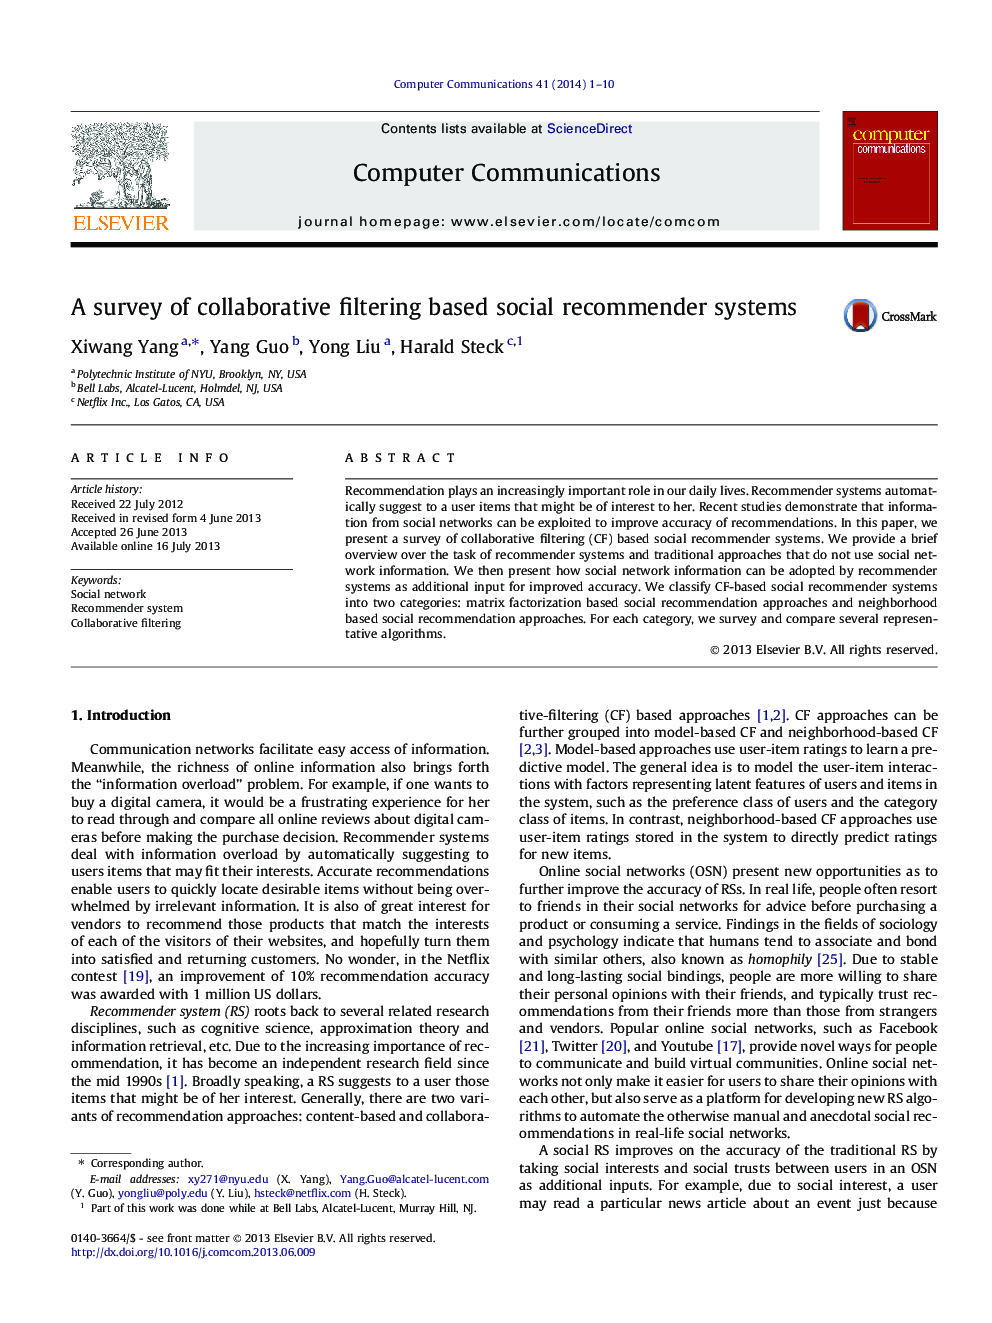 A survey of collaborative filtering based social recommender systems